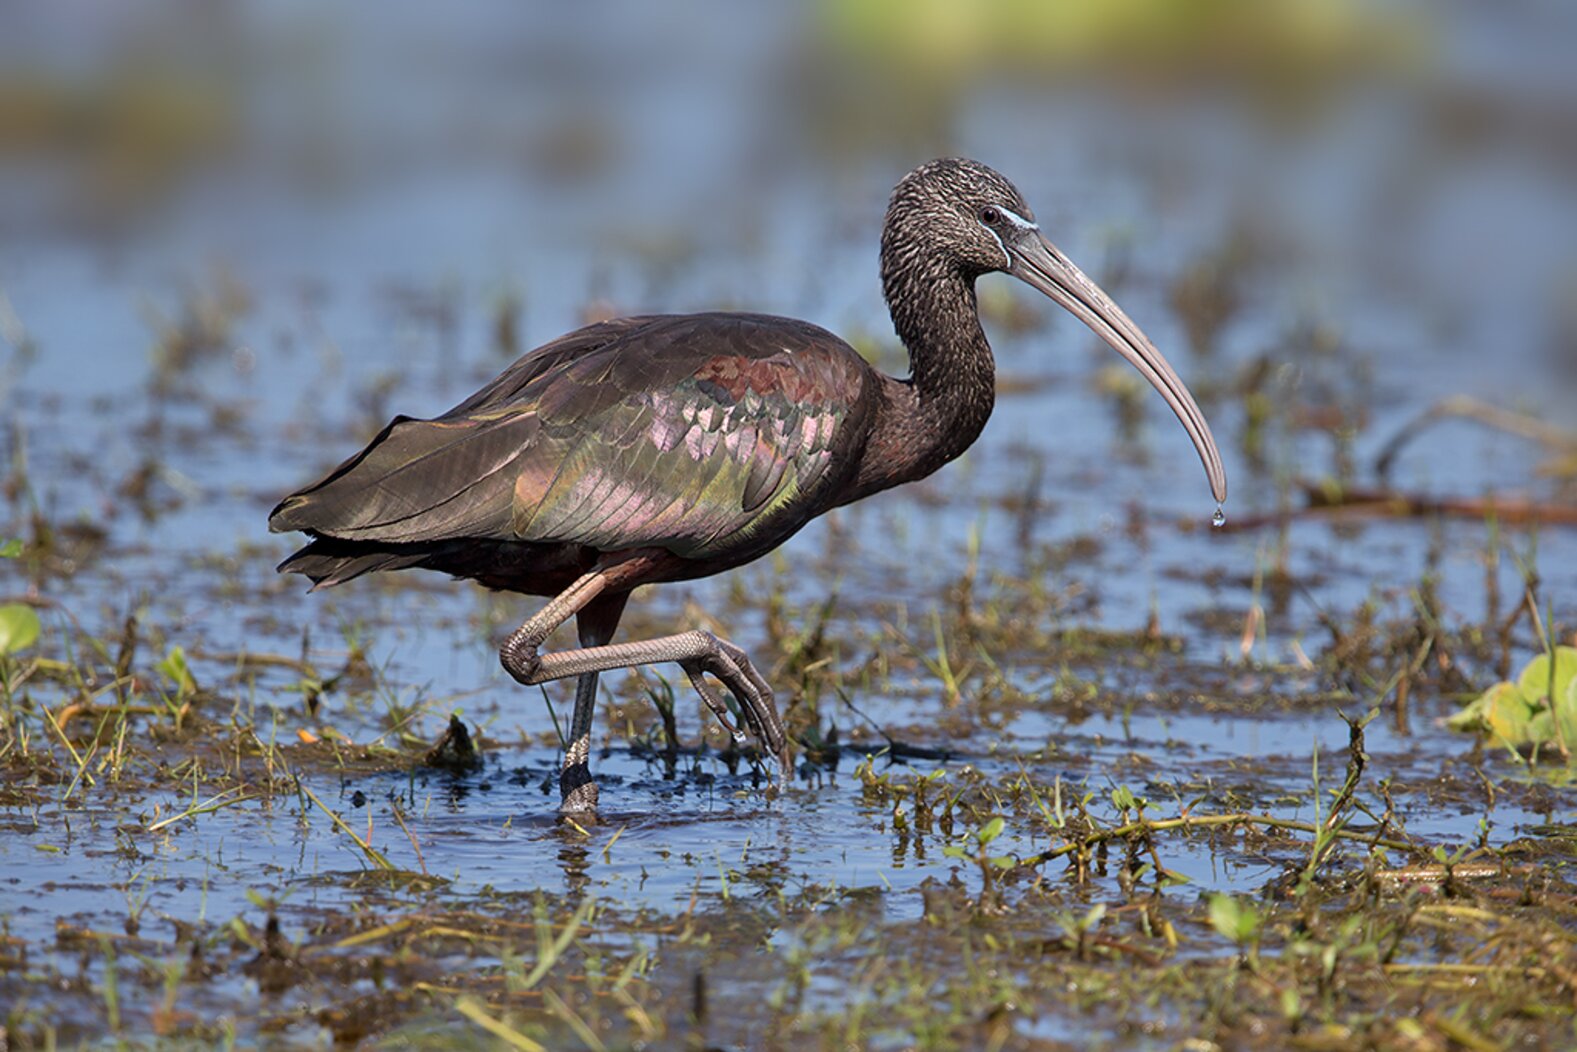 Glossy Ibis come to forage in Brookfield Park. Photo: David Speiser